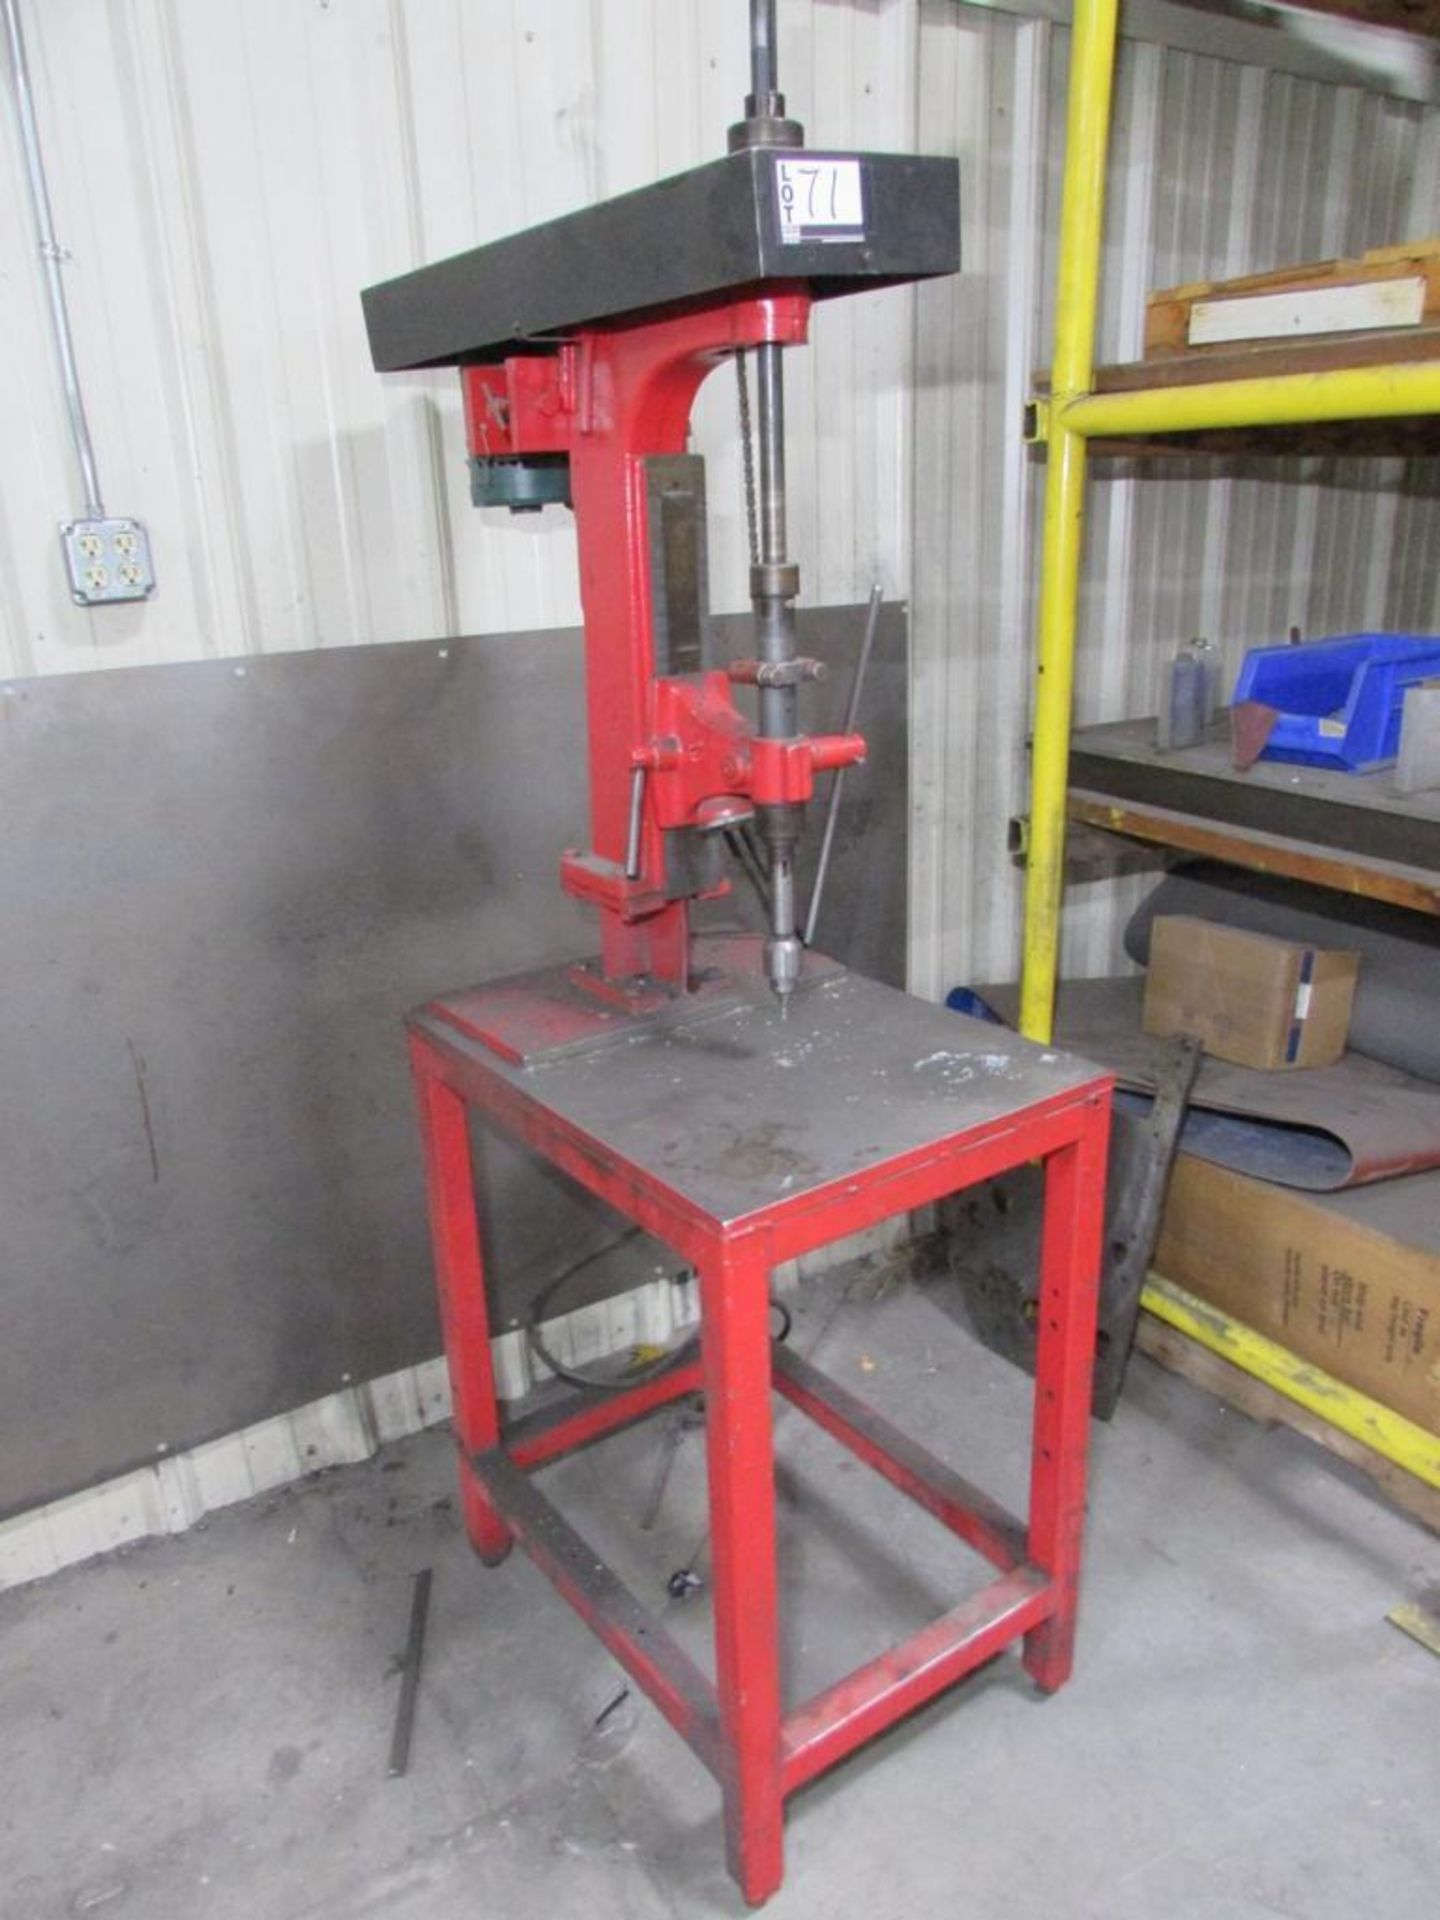 14" Benchtop Drill Press, 29" x 22" Steel Table, 1/2" Jacobs Chuck, 5" Stroke, 1/2HP